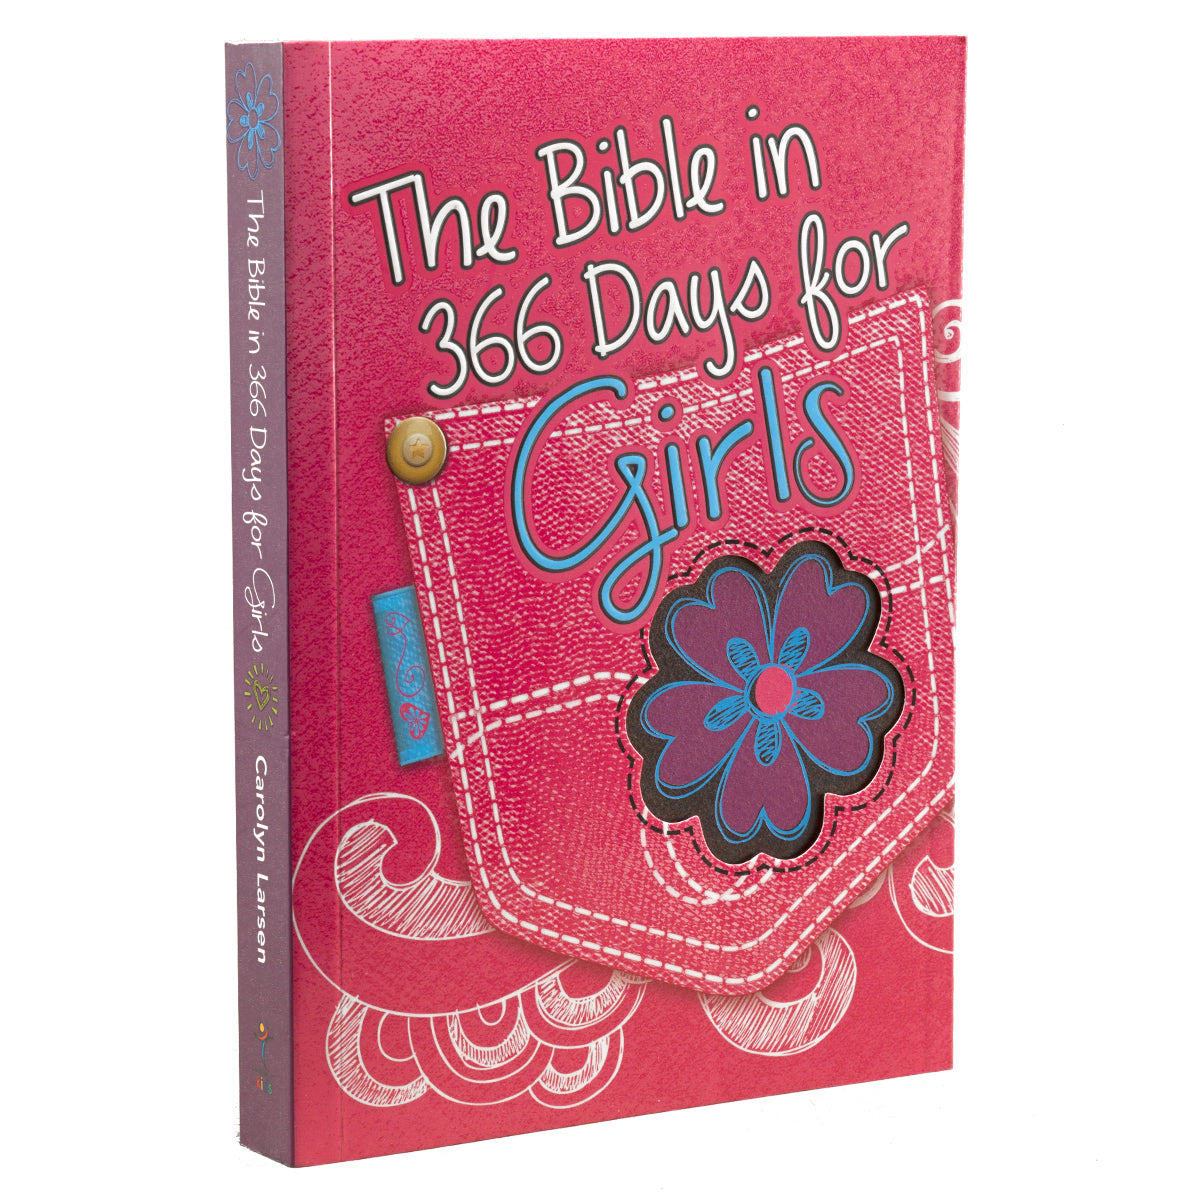 Image of The Bible in 366 Days for Girls other